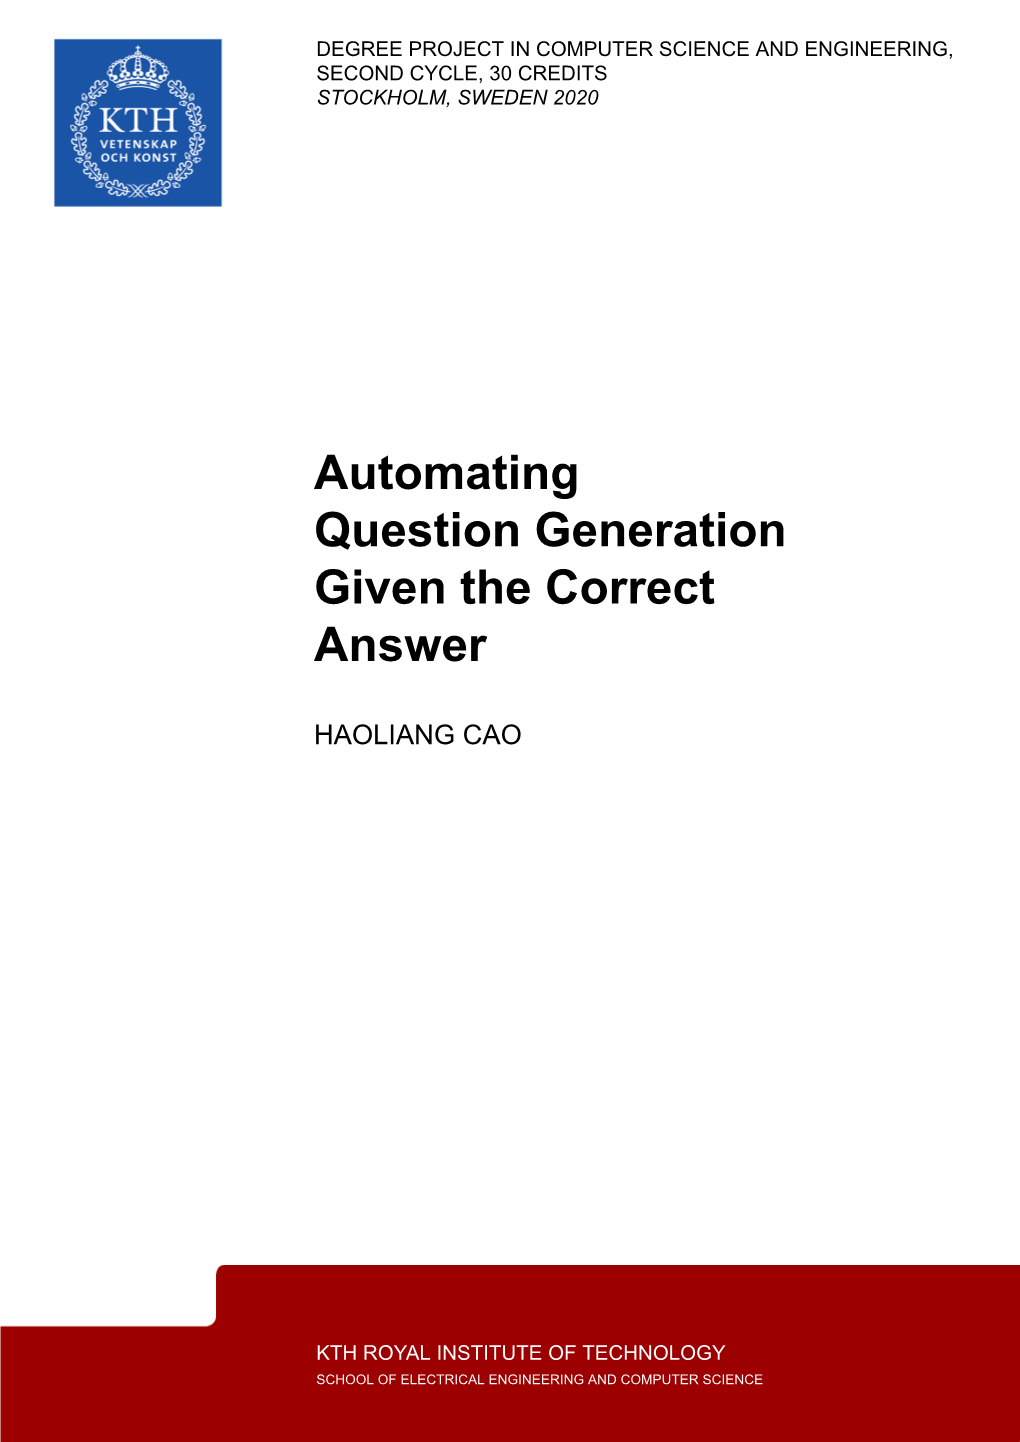 Automating Question Generation Given the Correct Answer